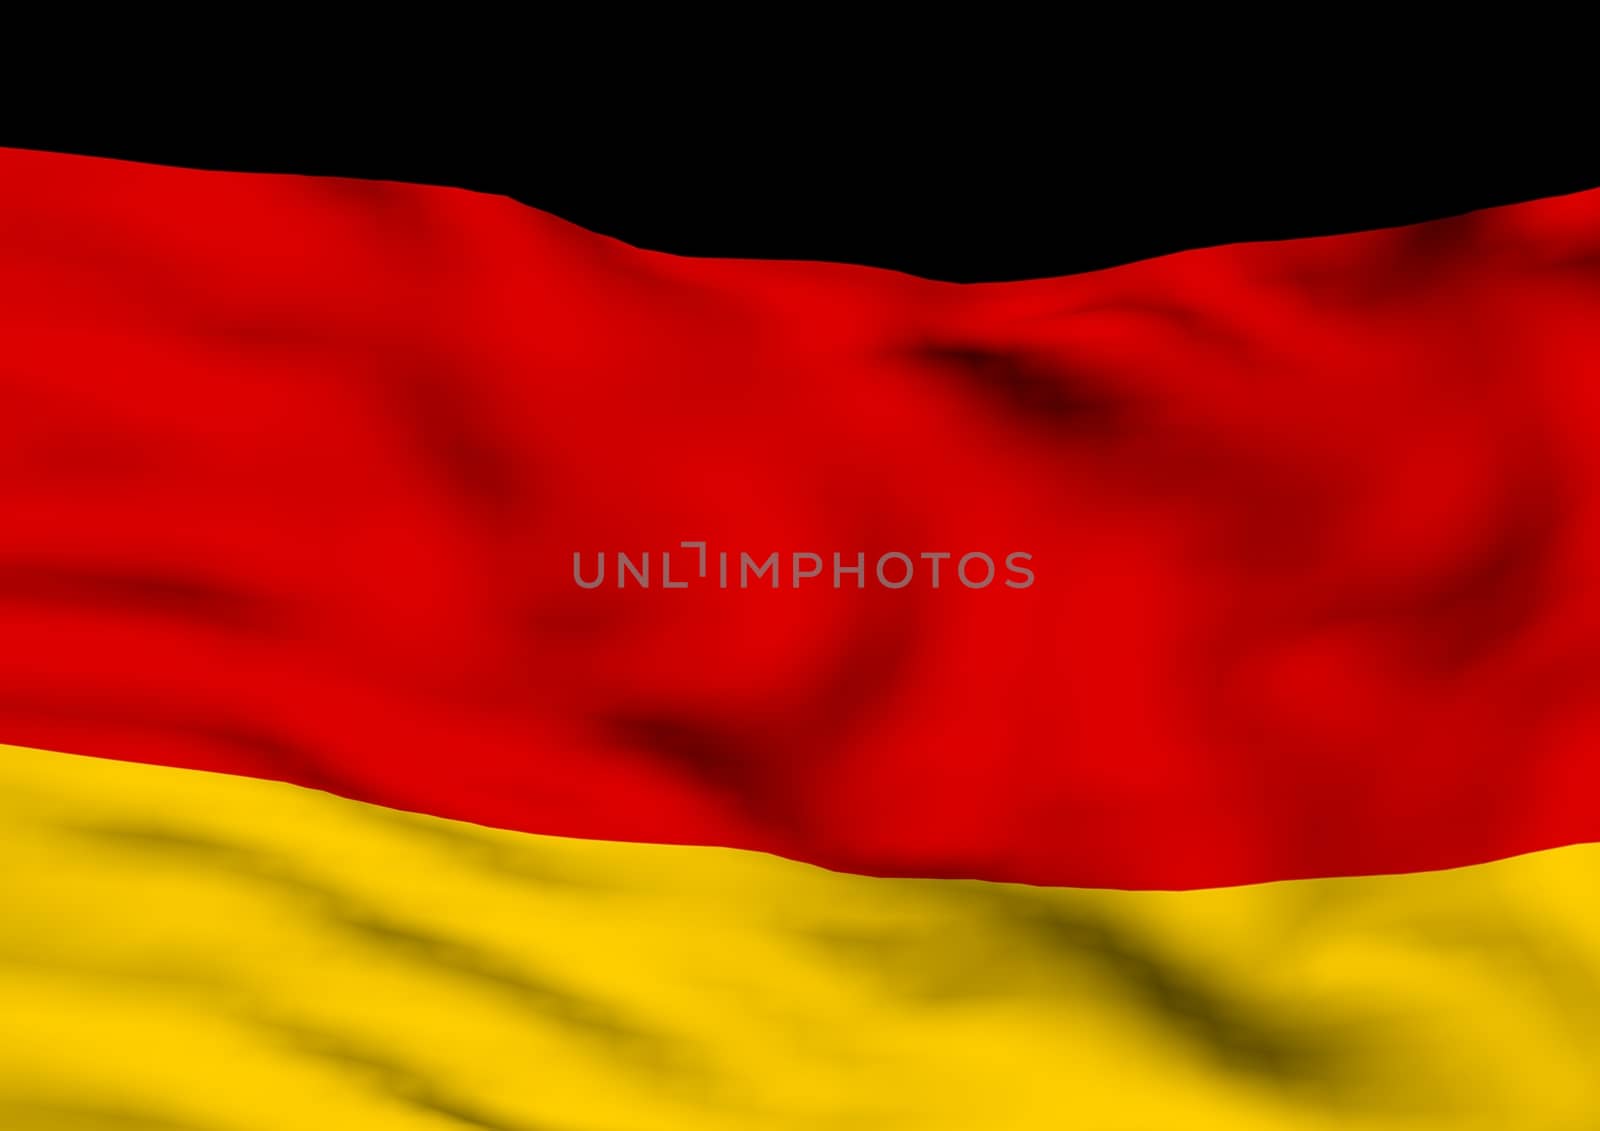 Image of a flag of Germany by richter1910